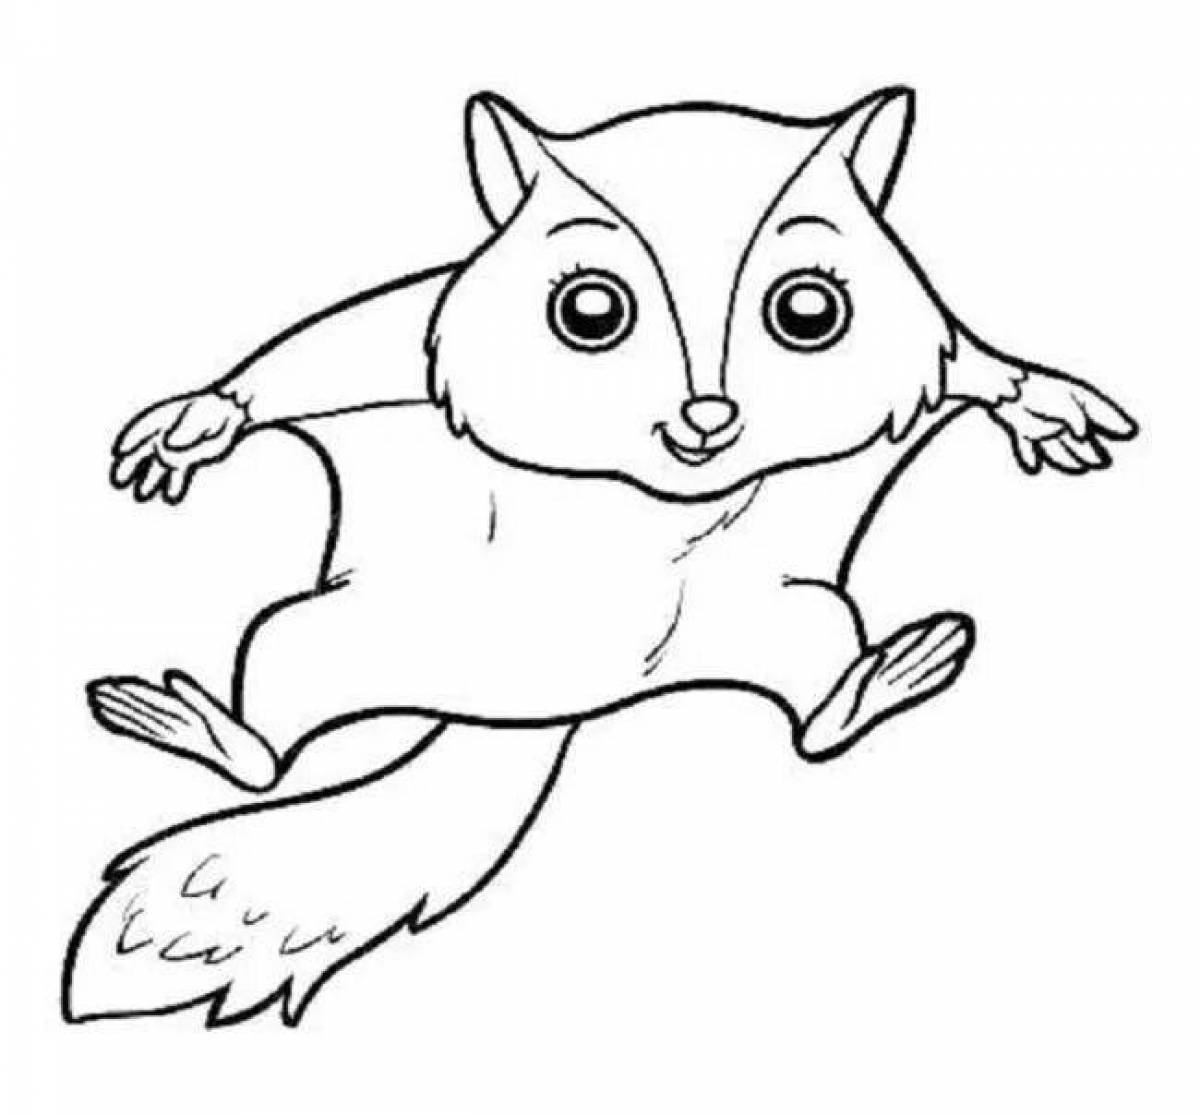 Colorful flying squirrel coloring page